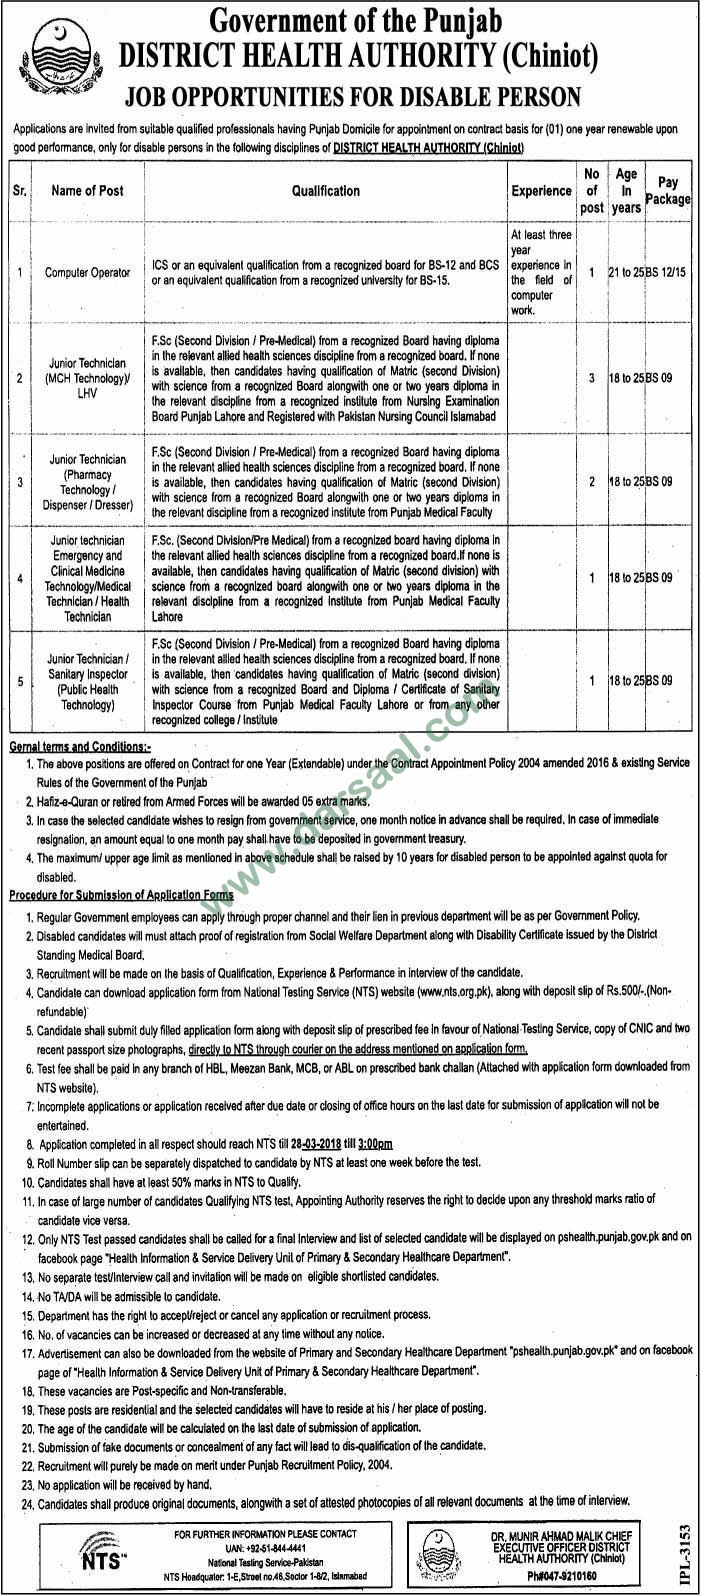 Computer Operator, Junior Technician Jobs in District Health Authority Chiniot, 11 March 2018